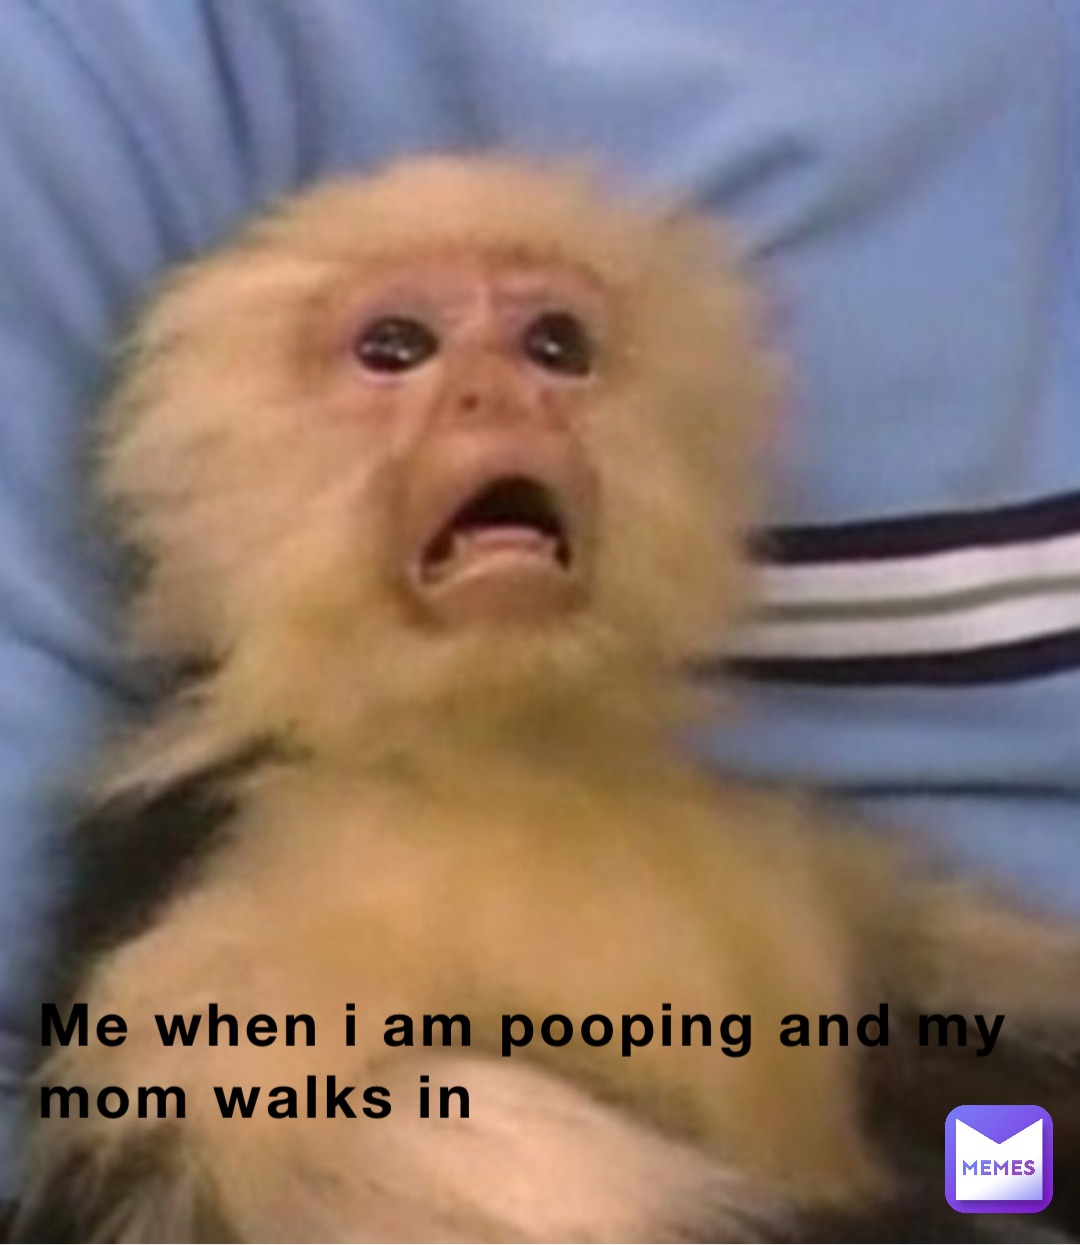 Me when i am pooping and my mom walks in